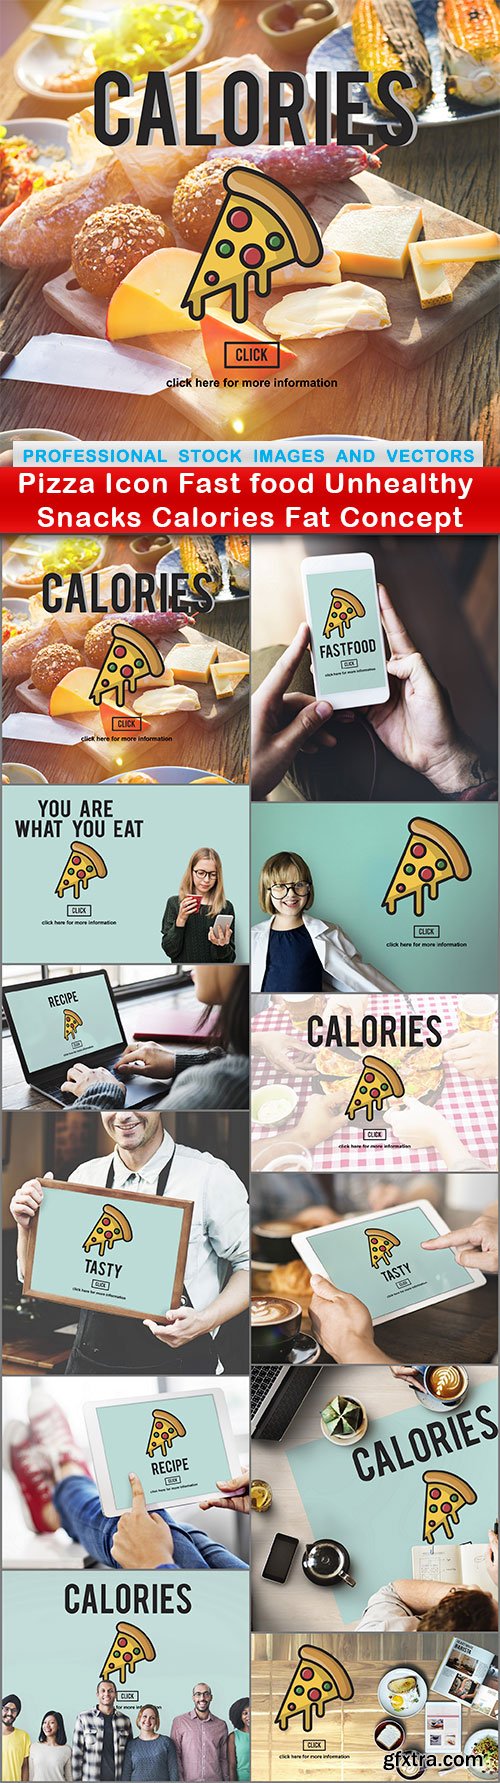 Pizza Icon Fast food Unhealthy Snacks Calories Fat Concept - 12 UHQ JPEG